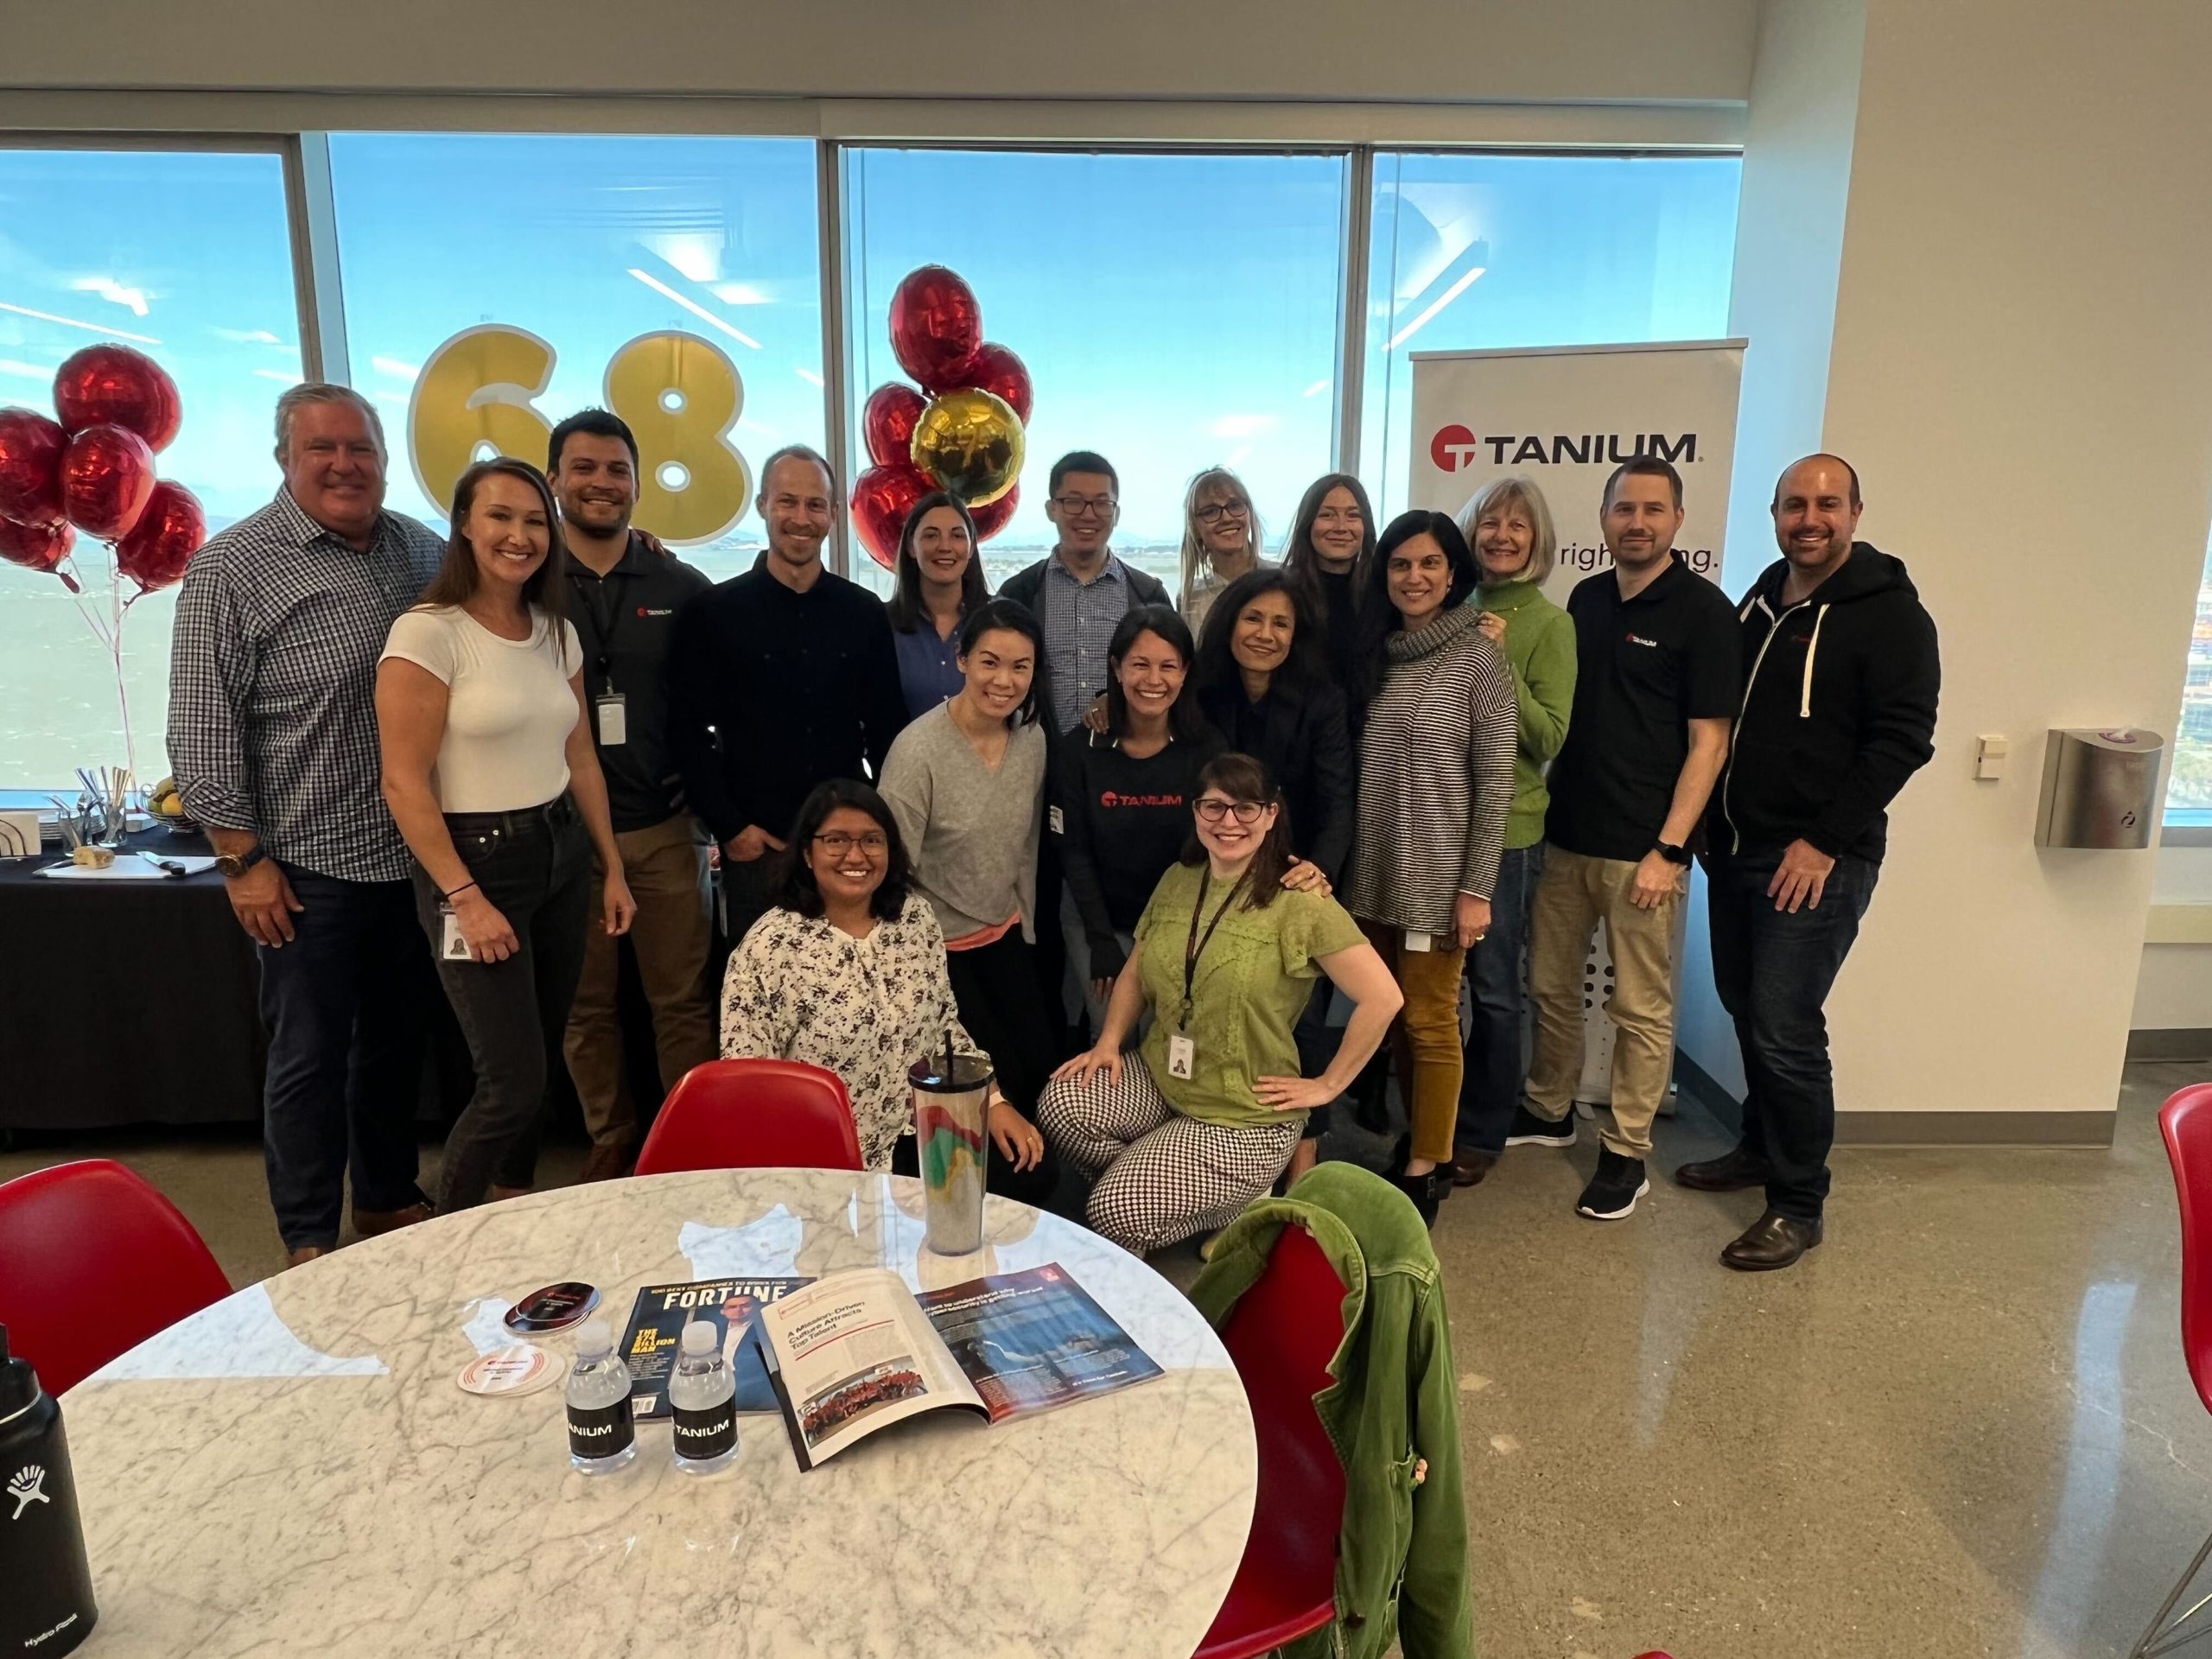 Team members celebrating being named to FORTUNE Magazine’s list of the “100 Best Companies to Work For,” in our Emeryville, CA office.